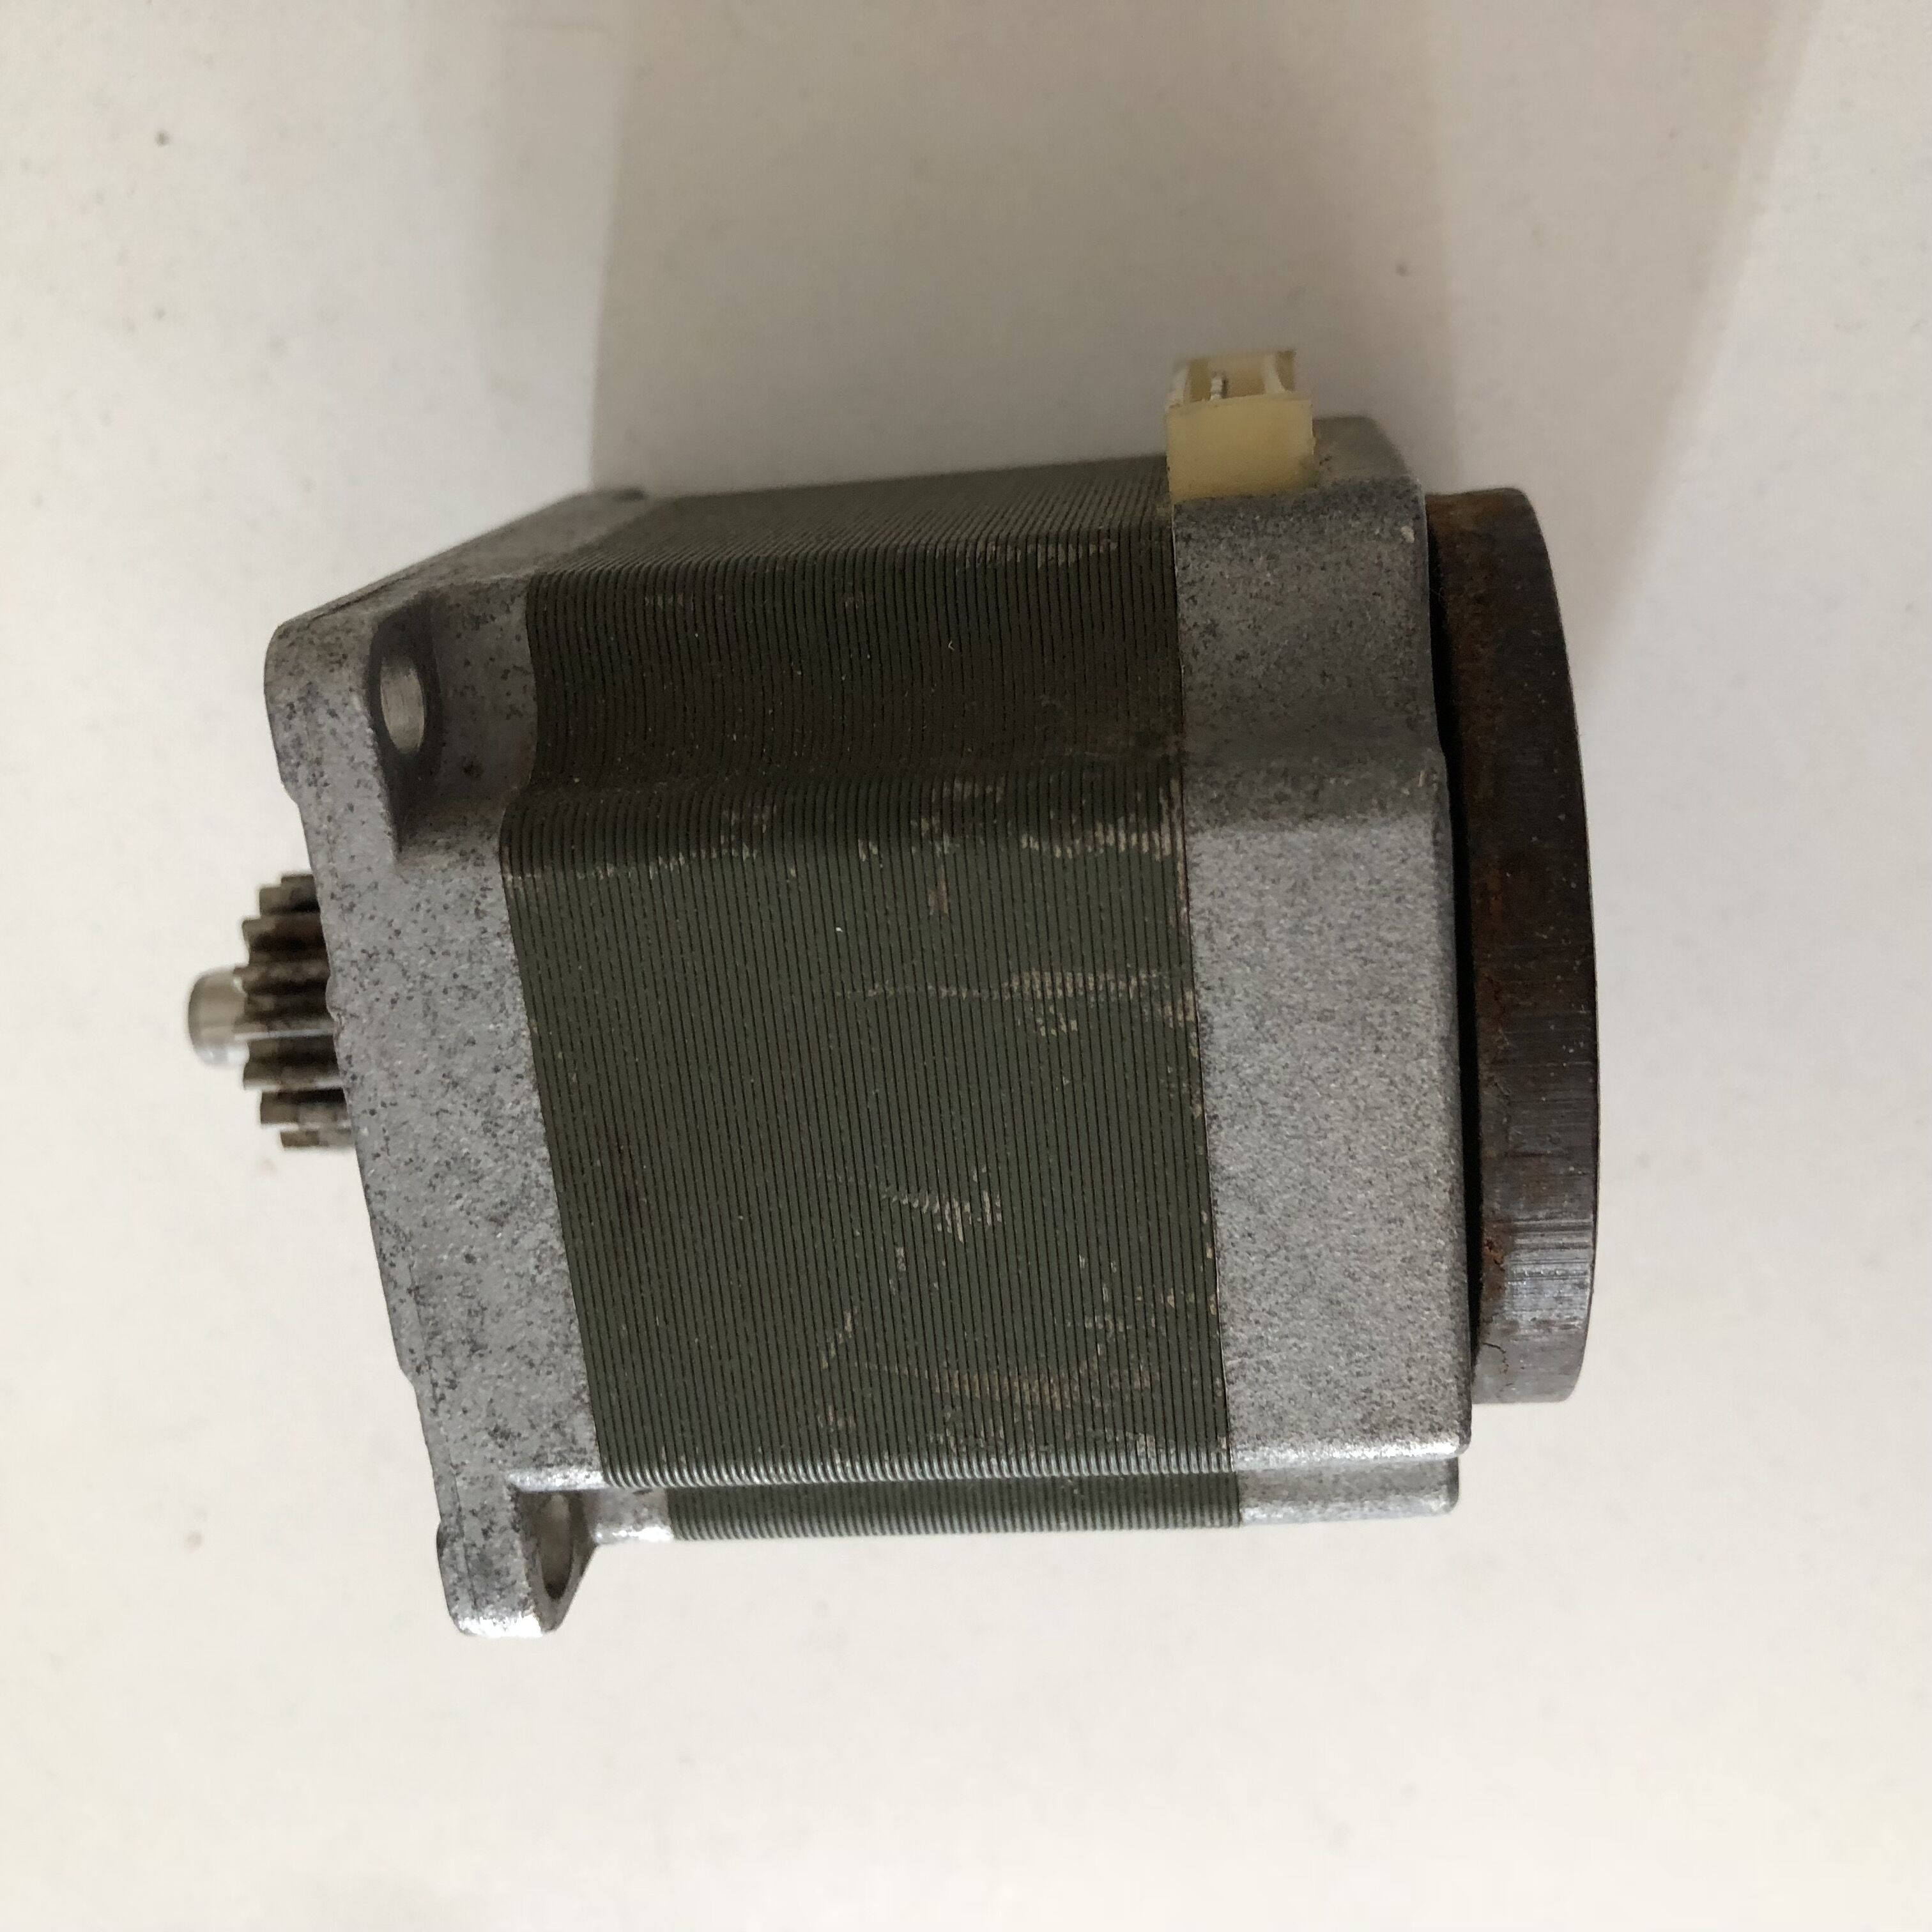 autoconer machine spare parts Schlafhorst used motor with part no. 886-135-004